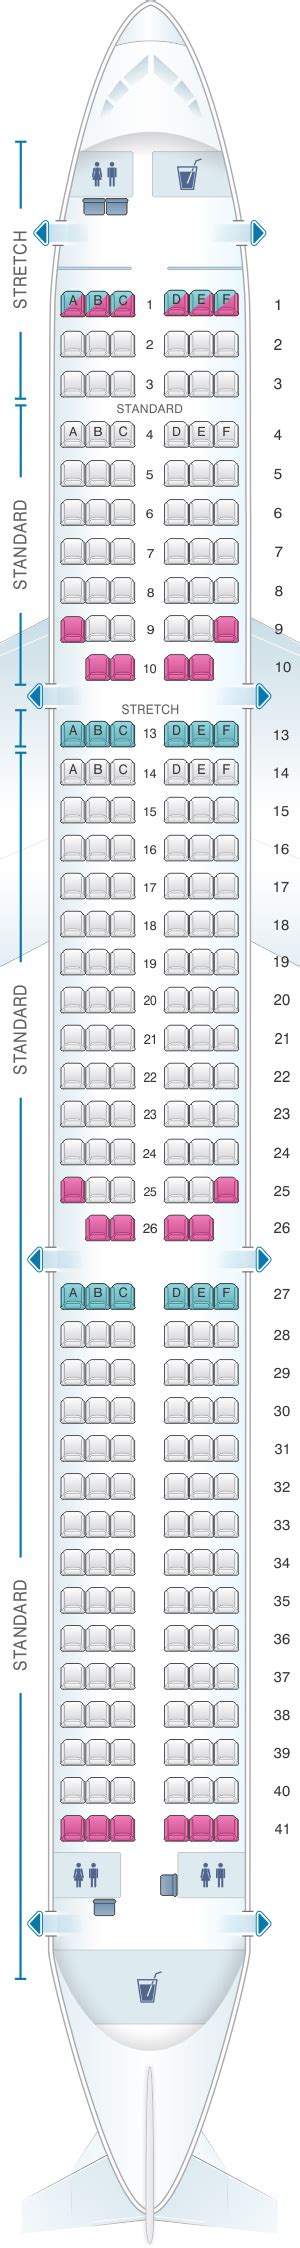 Frontier plane seat map. Apr 25, 2017 · Seat assignments on Frontier. For my flight, Frontier wanted an extra $12 to select a seat in the back of the plane. Or I could pay $24 to select a regular seat towards the front. Or $40 for an extra legroom seat in the first couple of rows or the exit. It’s possible that Frontier offers a few middle seats in the back for free, but I didn’t ... 